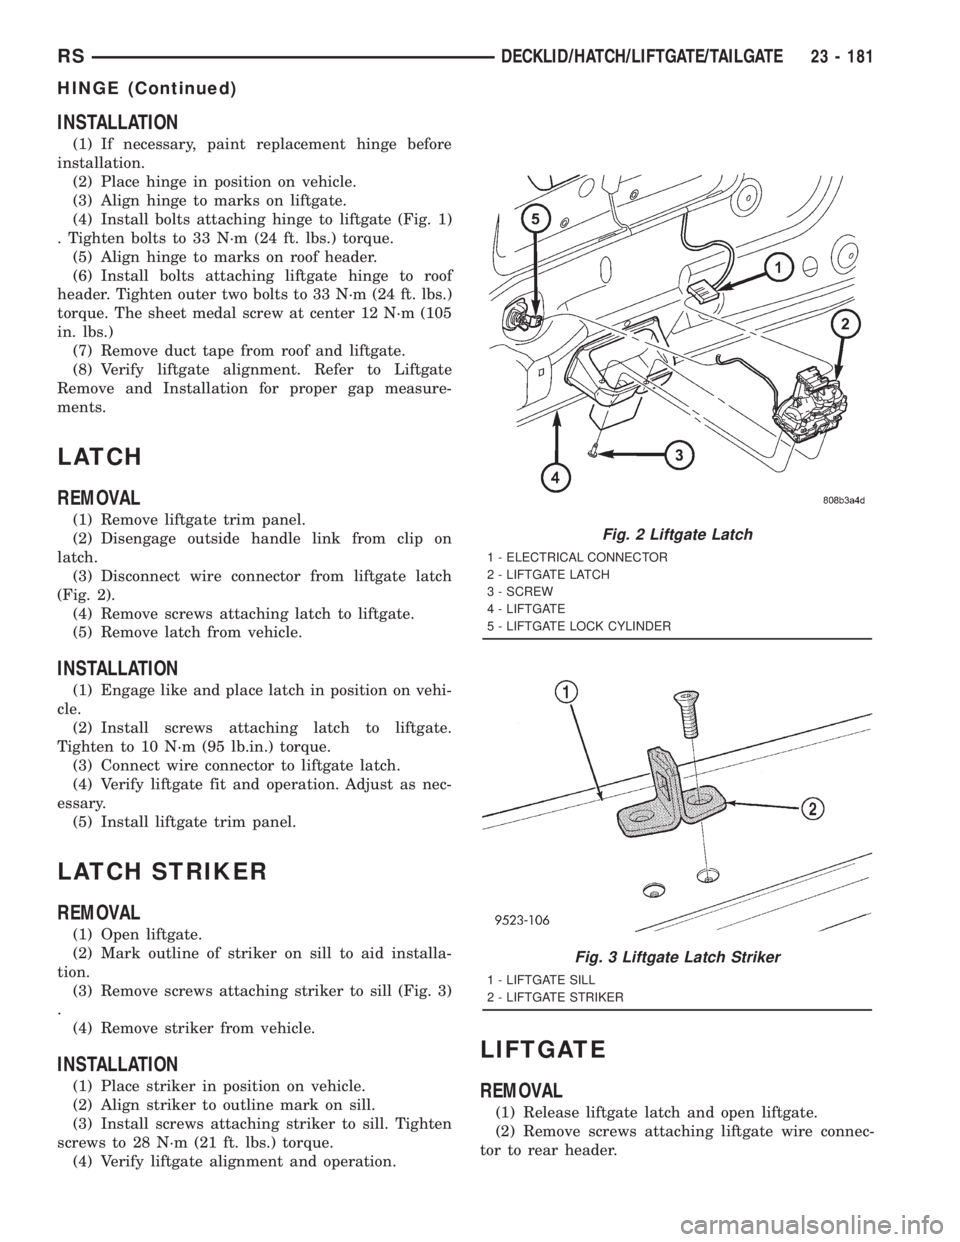 CHRYSLER VOYAGER 2001  Service Manual INSTALLATION
(1) If necessary, paint replacement hinge before
installation.
(2) Place hinge in position on vehicle.
(3) Align hinge to marks on liftgate.
(4) Install bolts attaching hinge to liftgate 